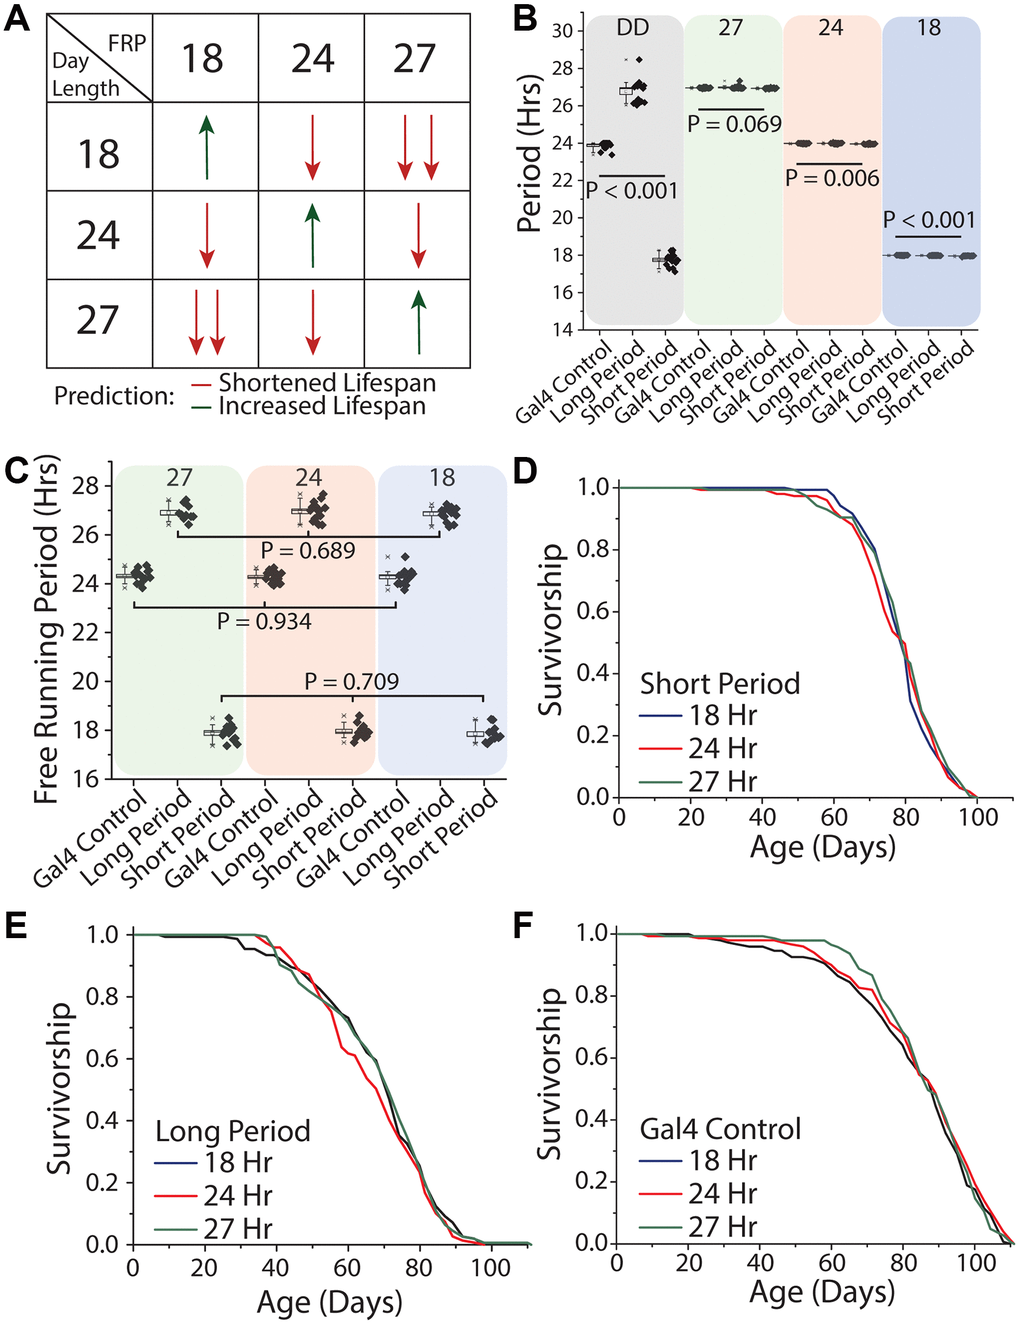 Uncoupling between light schedules and the circadian clock does not affect Drosophila lifespan. (A) Experimental design and lifespan predictions when Drosophila with free running periods (FRPs) of 18, 24, and 27 hours were exposed to corresponding light cycles. We predicted as day length further deviates from FRP, that lifespan will be negatively impacted (red arrows) and having a FRP that corresponds with the day length be beneficial to lifespan (green arrows). (B) Free running period of 7-day old flies of the genotypes used in the lifespan experiments (grey quadrant), and activity period when exposed to the three light cycles used (green, red and blue quadrants). Clk856-Gal4 x UAS-DBTS (short day) exhibited a mean period length of 17.8 hours (SD = 0.34) and Clk856-Gal4xUAS-DBTL (long day) showed a mean period length of 26.8 hours (SD = 0.61). Normal-day CLK856-GAL4 x w1118 (normal day) had a period length of 23.9 hours (SD = 0.19). When exposed to environmental light all flies had an activity rhythm corresponding with the photoperiod. Light cycle day length during recording period is denoted at the top of each colored box. (C) After three weeks under light cycles all genotypes were placed in free running conditions and all genotypes reverted to their endogenous free running period. When comparing within a genotype there were no effects of rearing photoperiod, Clk856-Gal4 x w1118 (27 hr n = 15, 24 hr n = 16, 18 hr n = 15; P = 0.934), Clk856-Gal4 x UAS-DBTL (27 hr n = 10, 24 hr n = 15, 18 hr n = 14; P = 0.689), and Clk856-Gal4 x UAS-DBTS (27 hr n = 12, 24 hr n = 13, 18 hr n = 12; P = 0.709). Previous light cycle day length is denoted at the top of each colored box. (D–F) Lifespan of Clk856-Gal4 x UAS-DBTS, Clk856-Gal4 x UAS-DBTL, and Clk856-Gal4 x w1118 was not influenced by environmental light cycle, with all genotypes showing no significant effect of light cycle on lifespan (D) short (18 hr n = 157, 24 hr n = 151, 27 hr n = 157; P = 0.615), (E) long (18 hr n = 153, 24 hr n = 149, 27 hr n = 155; P = 0.407), and (F) Gal4 control (18 hr n = 148, 24 hr n = 150, 27 hr n = 143; P = 0.554).